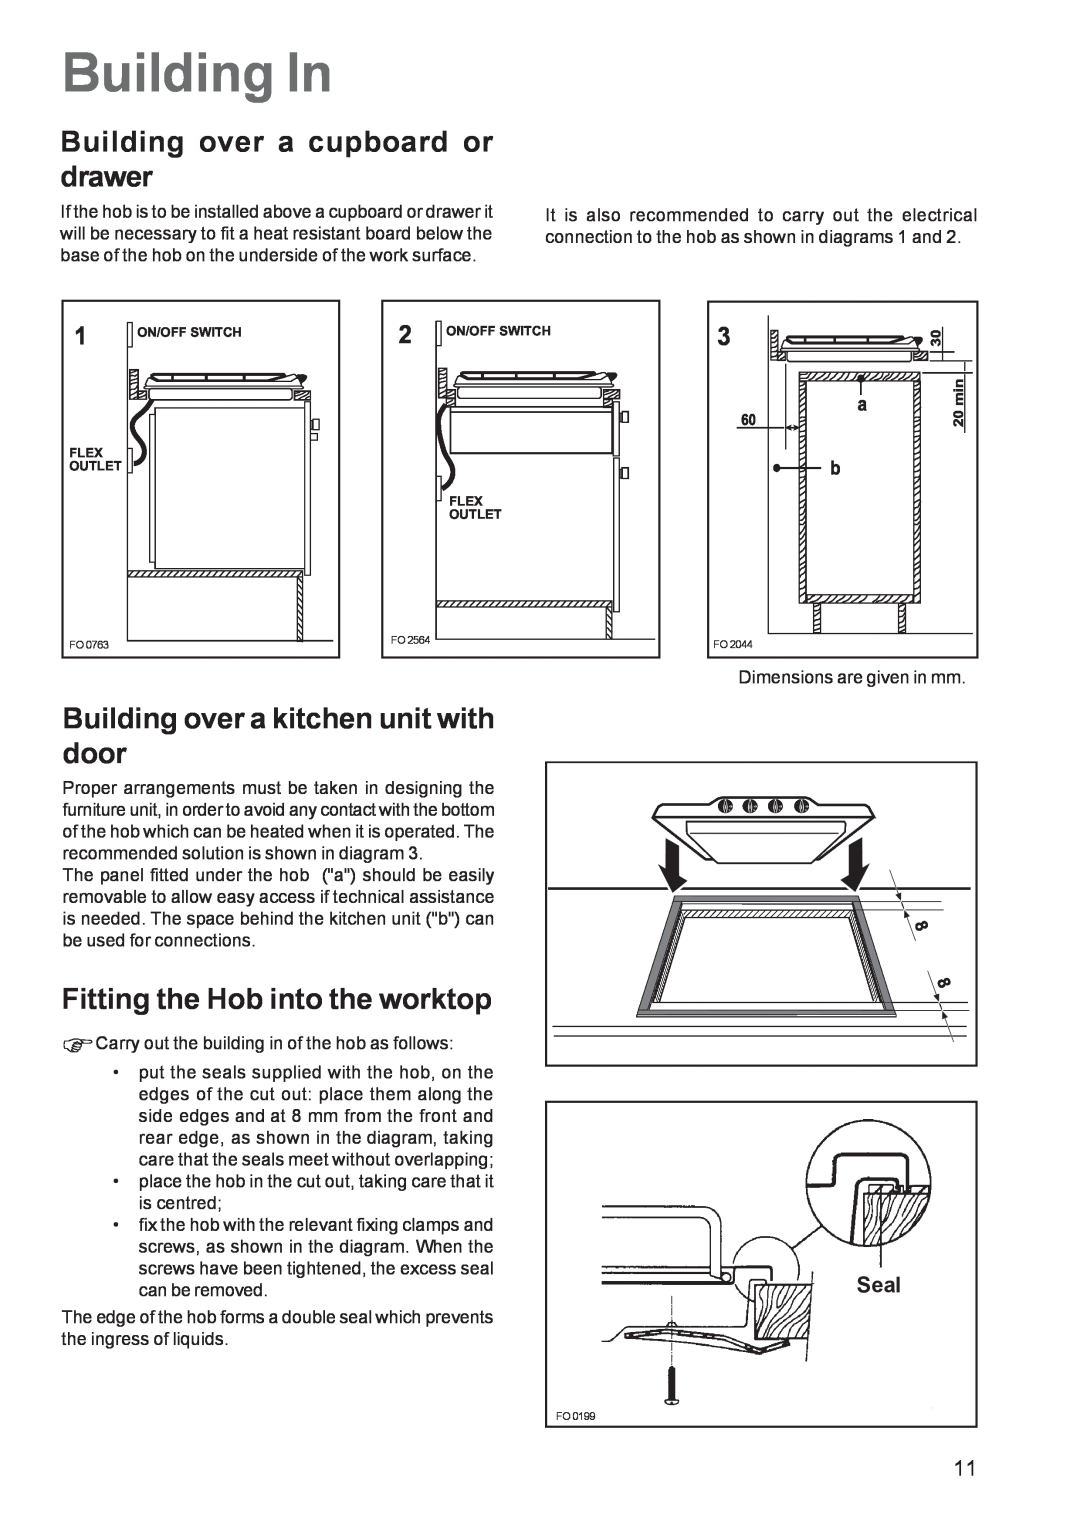 Electrolux EHG 6762 manual Building In, Building over a cupboard or drawer, Building over a kitchen unit with door, Seal 